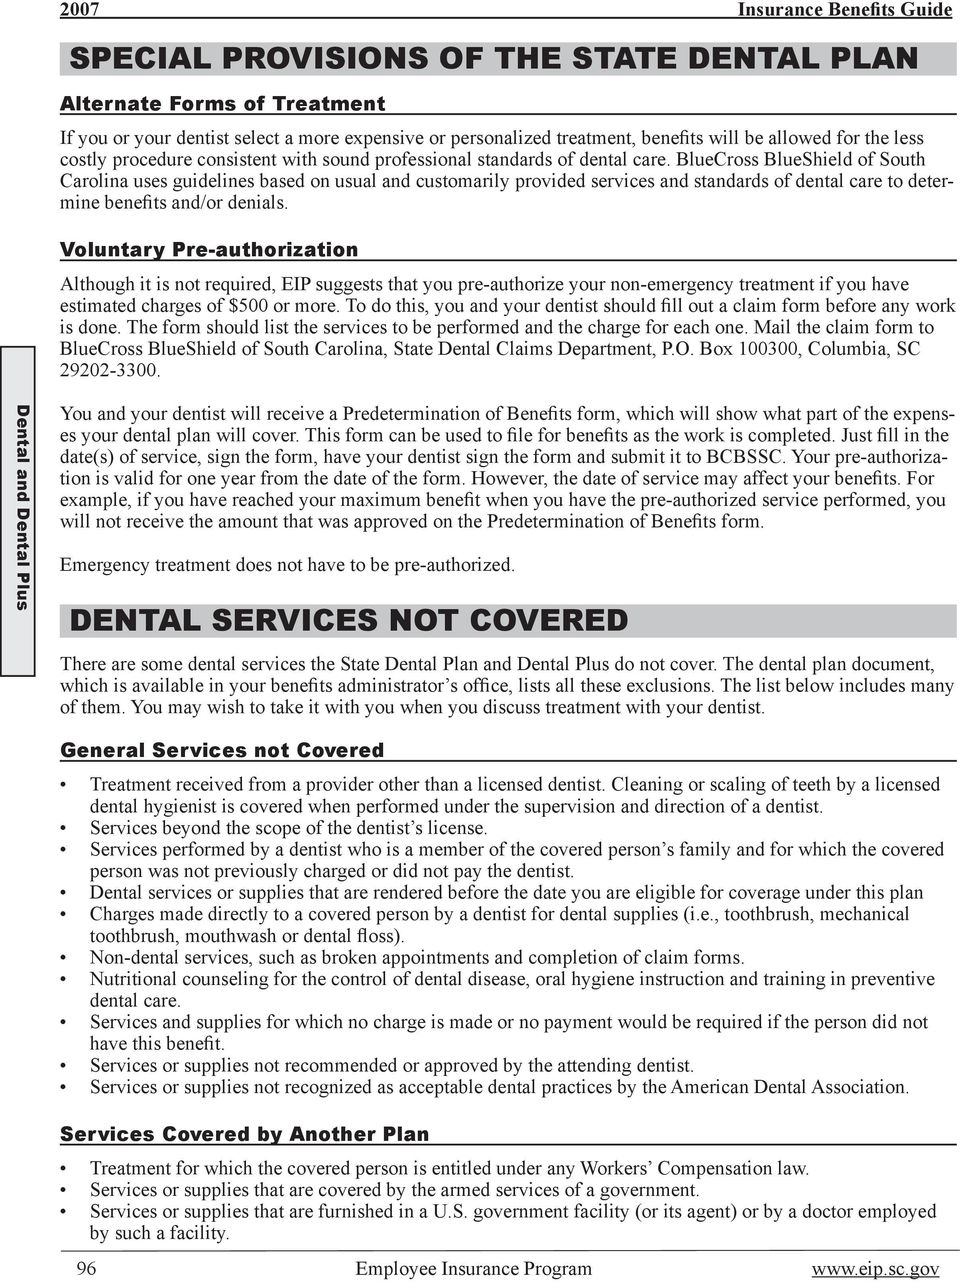 BlueCross BlueShield of South Carolina uses guidelines based on usual and customarily provided services and standards of dental care to determine benefits and/or denials.